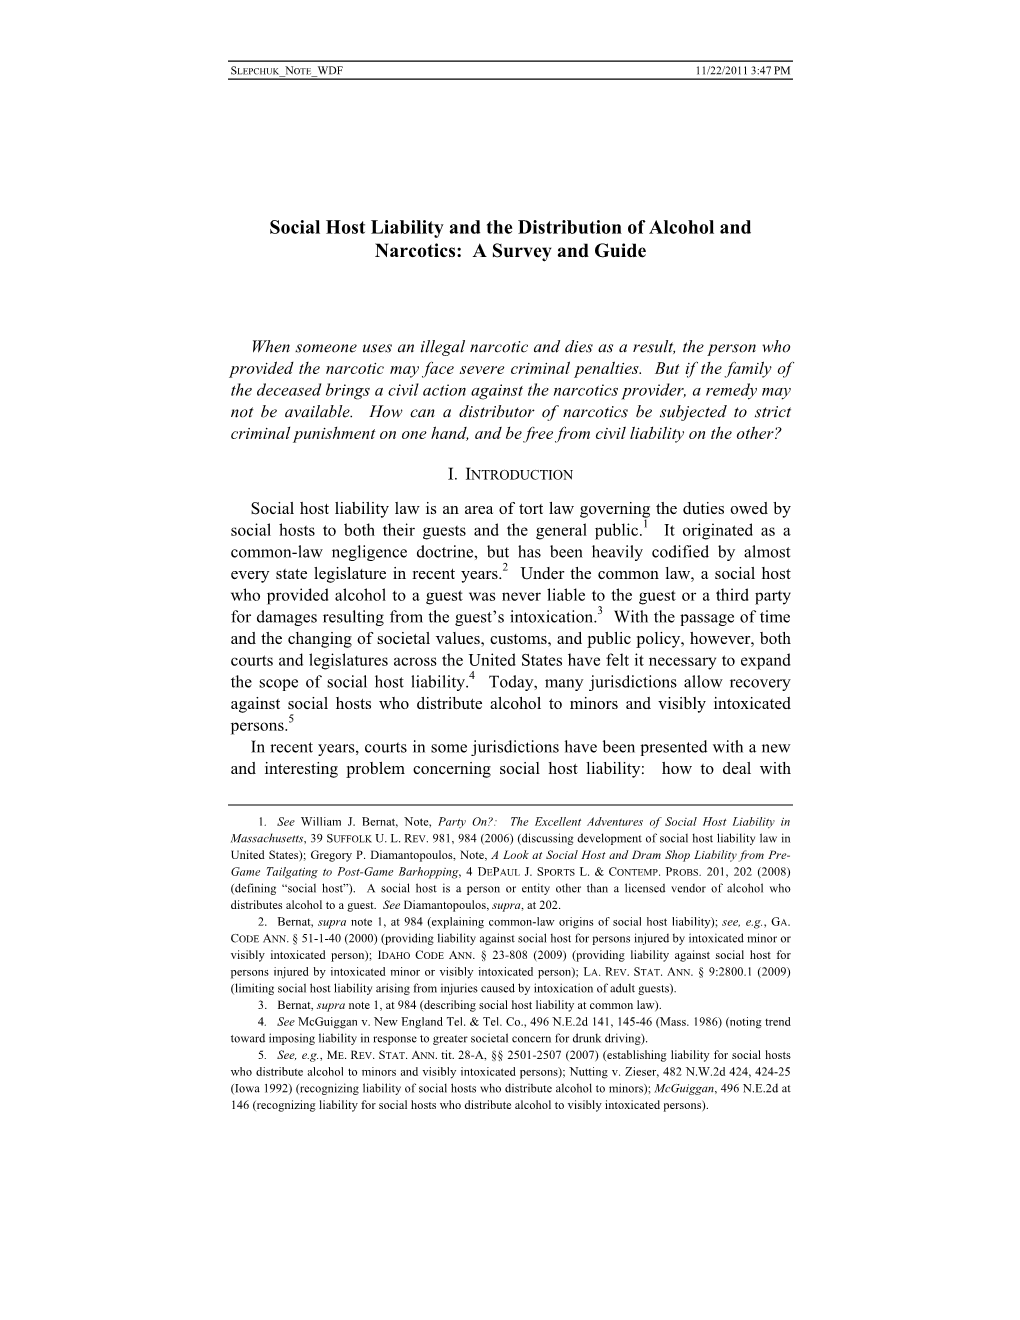 Social Host Liability and the Distribution of Alcohol and Narcotics: a Survey and Guide